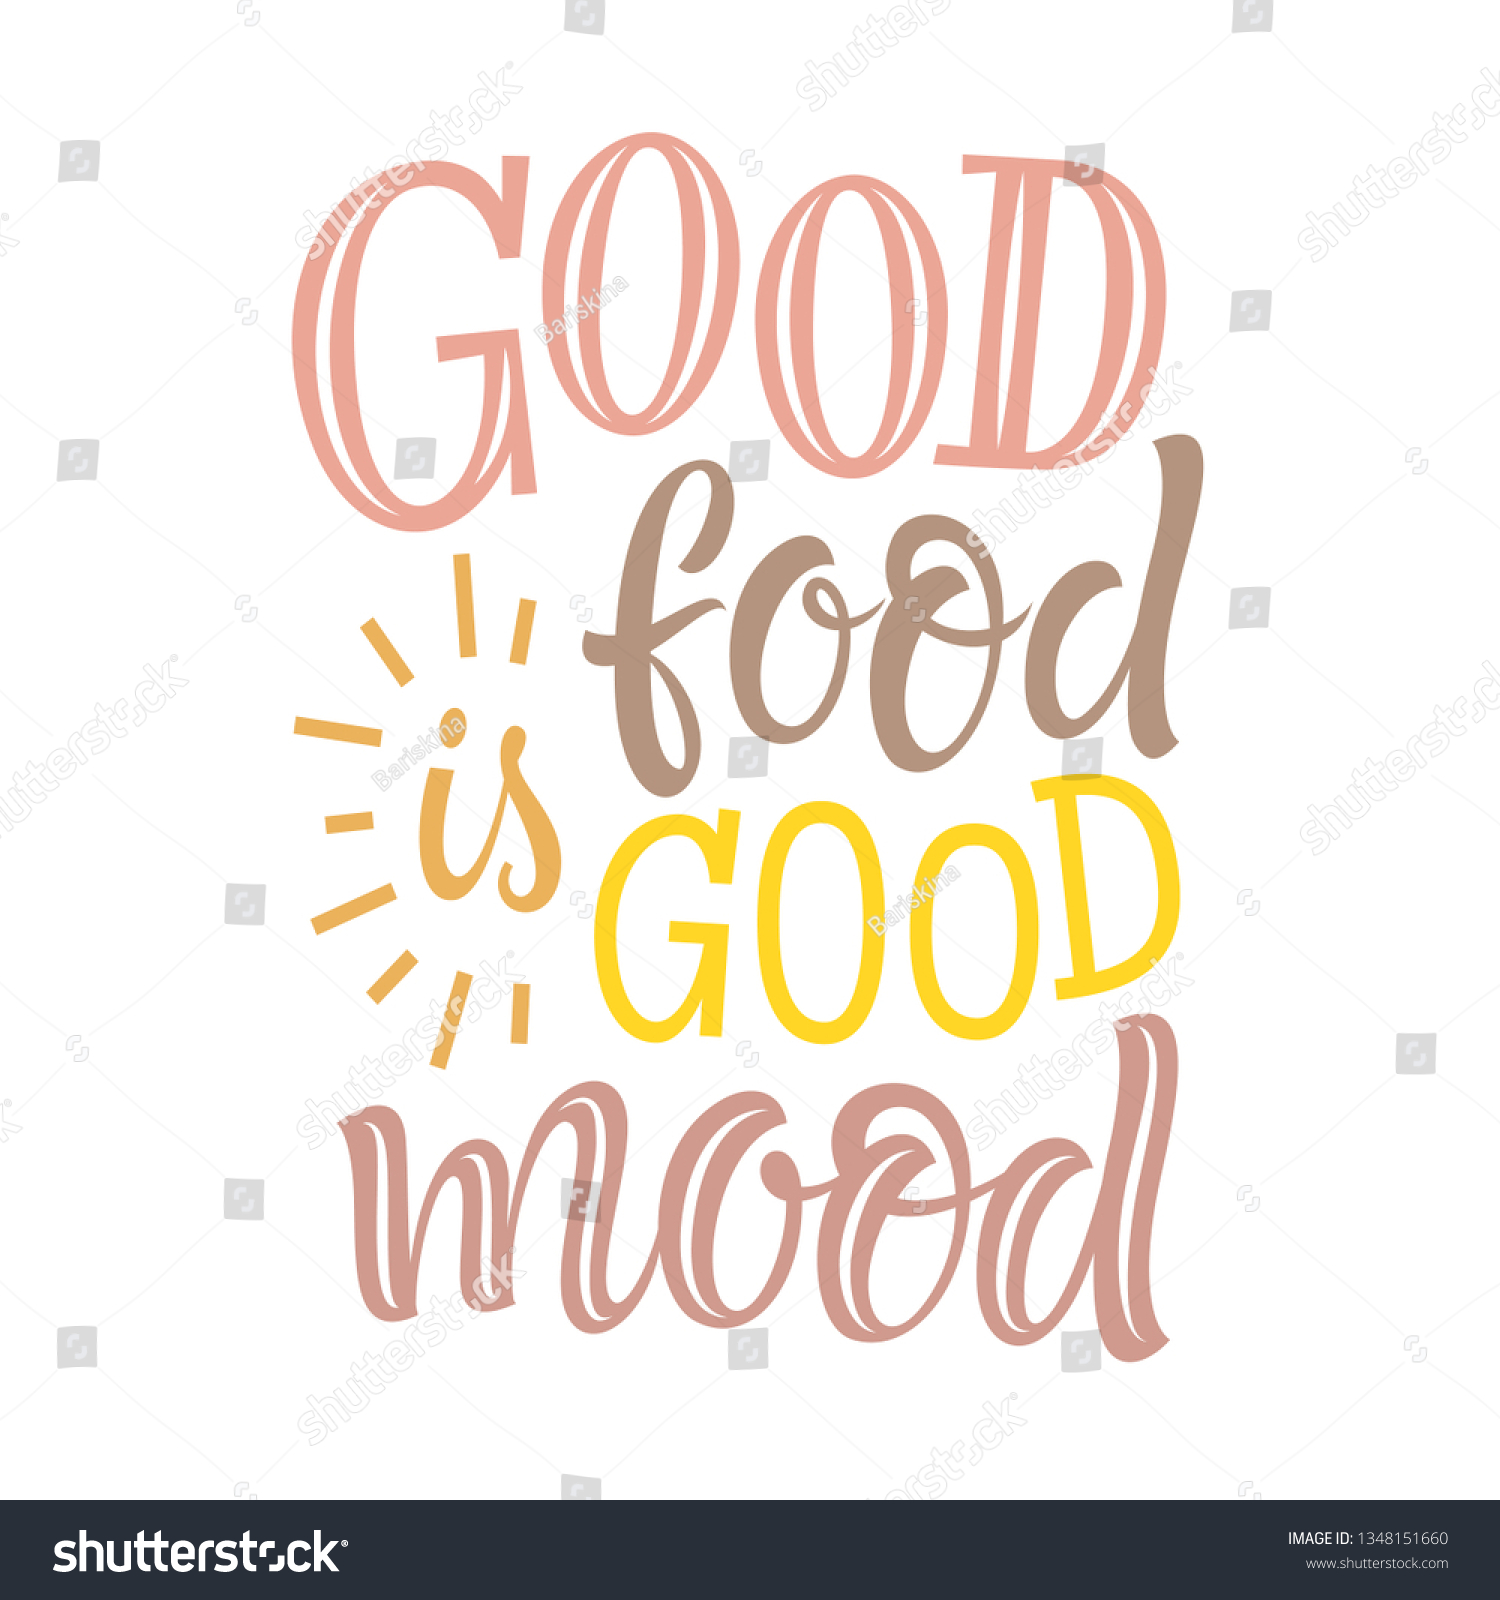 SVG of Vector illustration set of lettering quotes. Graphic design for restaurant, cafe, farm, market, menu, recipes. Elements for stickers, cards, prints. Hand drawn typography phrase about food and cooking svg